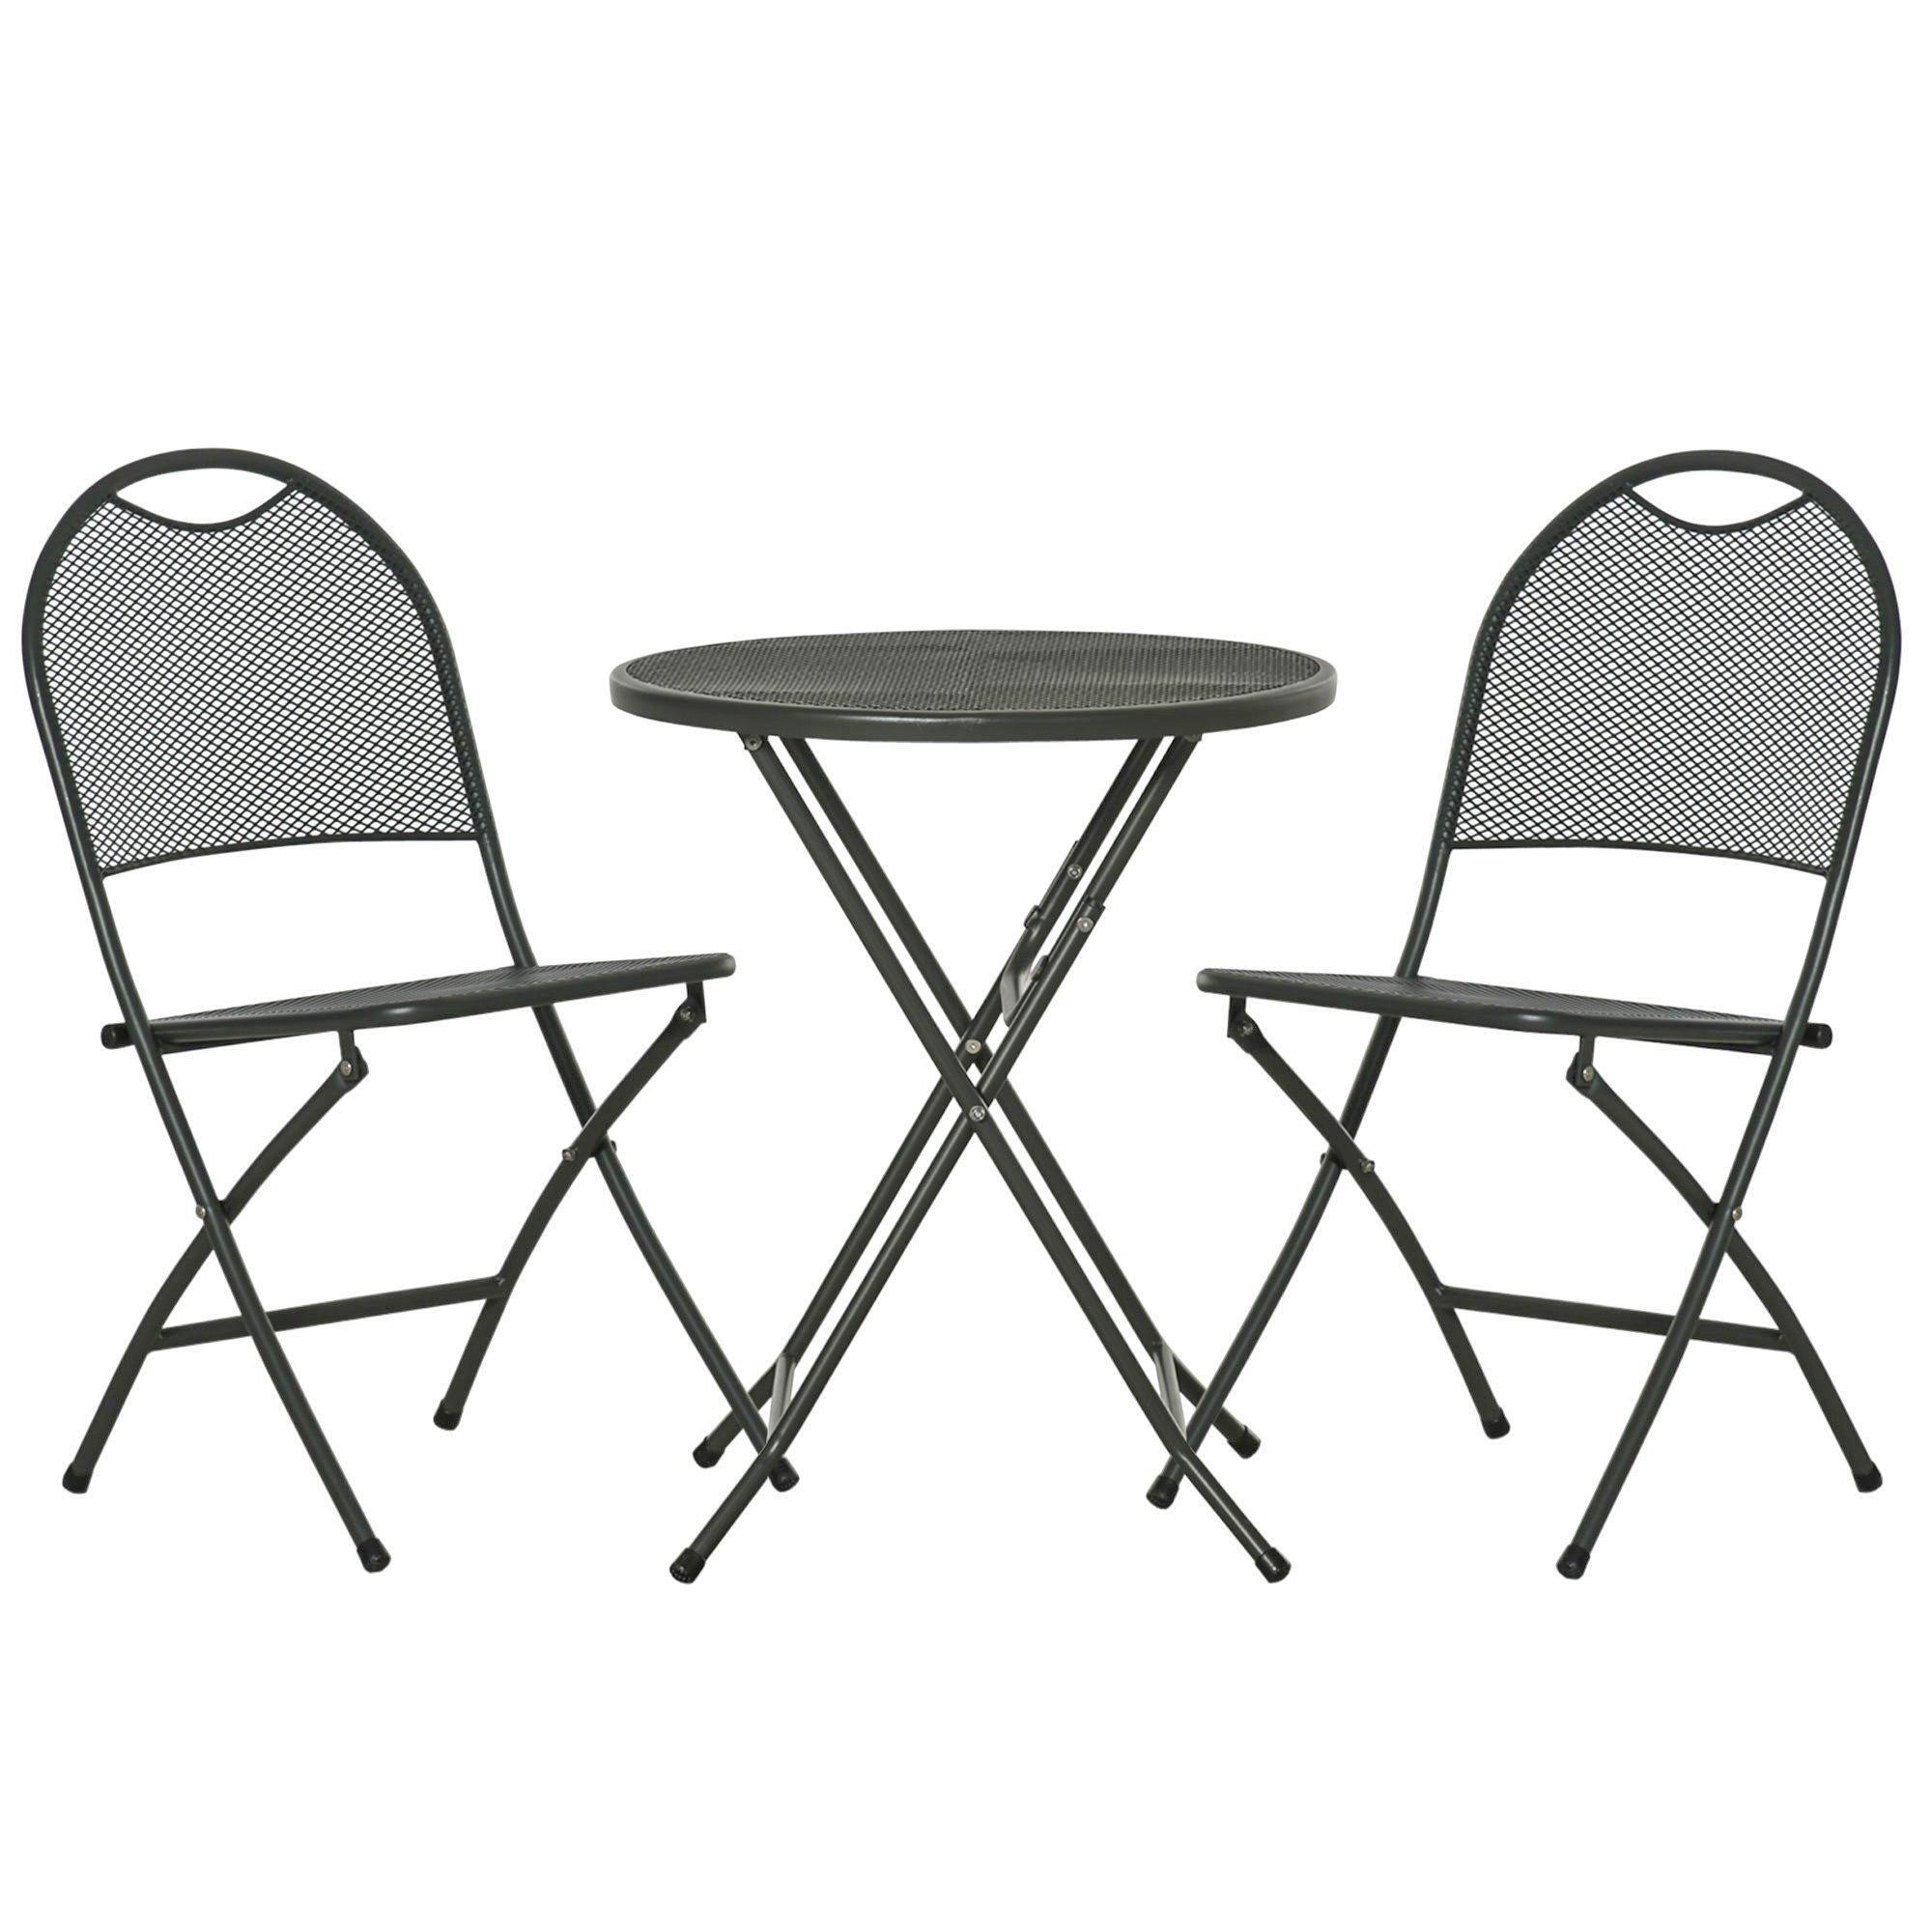 3 Piece Garden Bistro Set with Foldable Design Round Dining Table - image 1